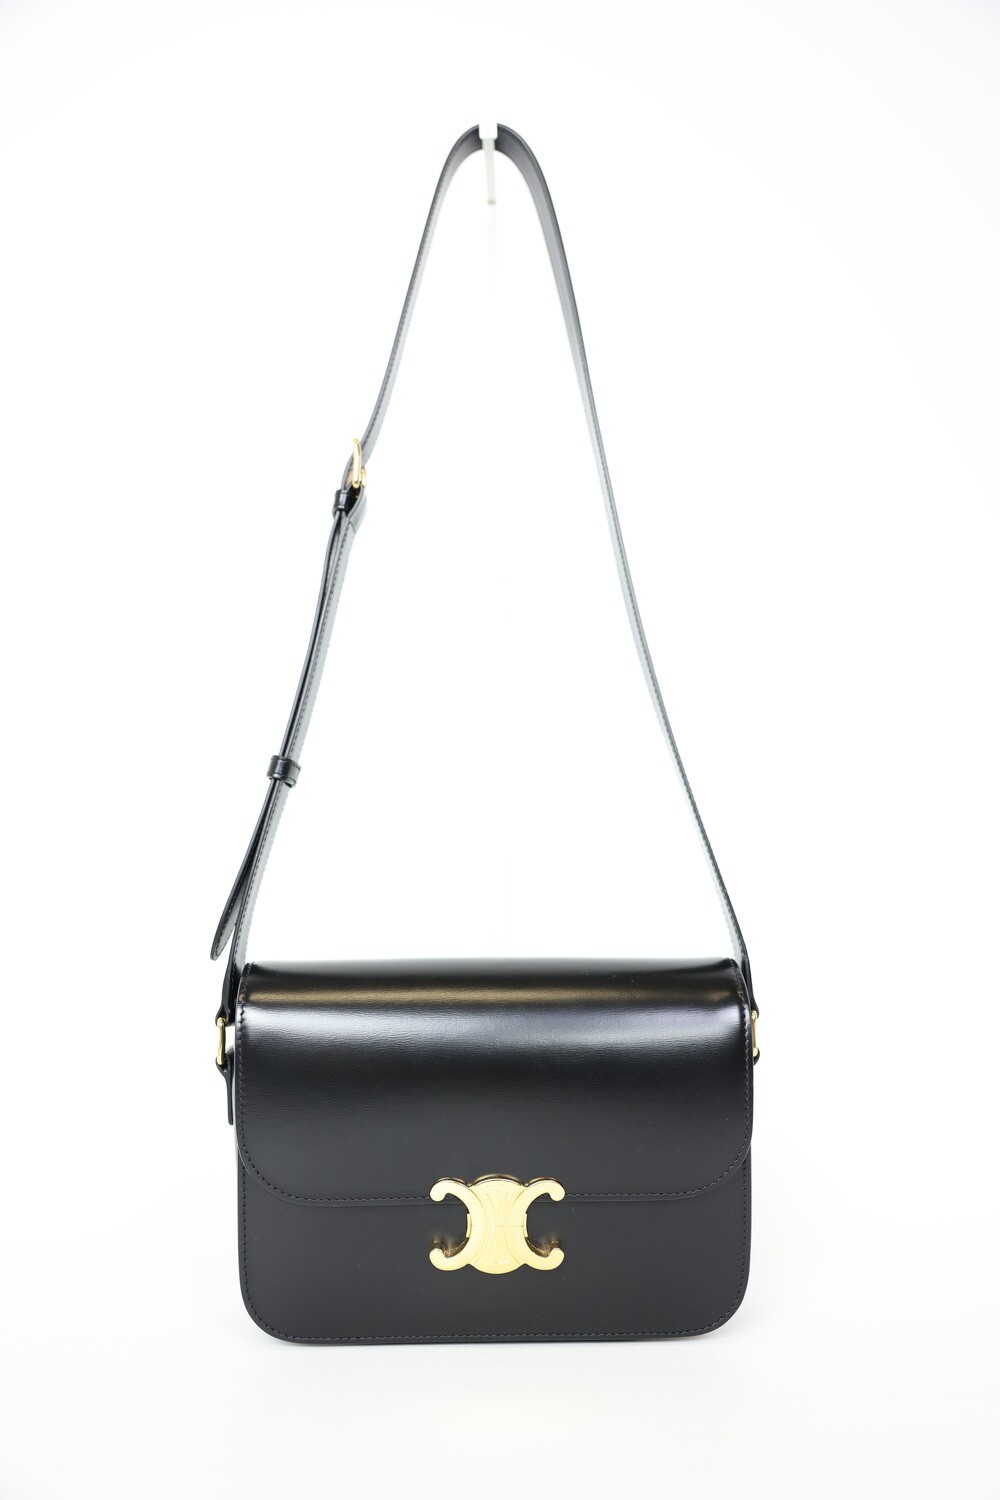 Celine Triomphe Shoulder Bag Medium, Black Smooth Calfskin Leather With Gold Hardware, Preowned In Box WA001